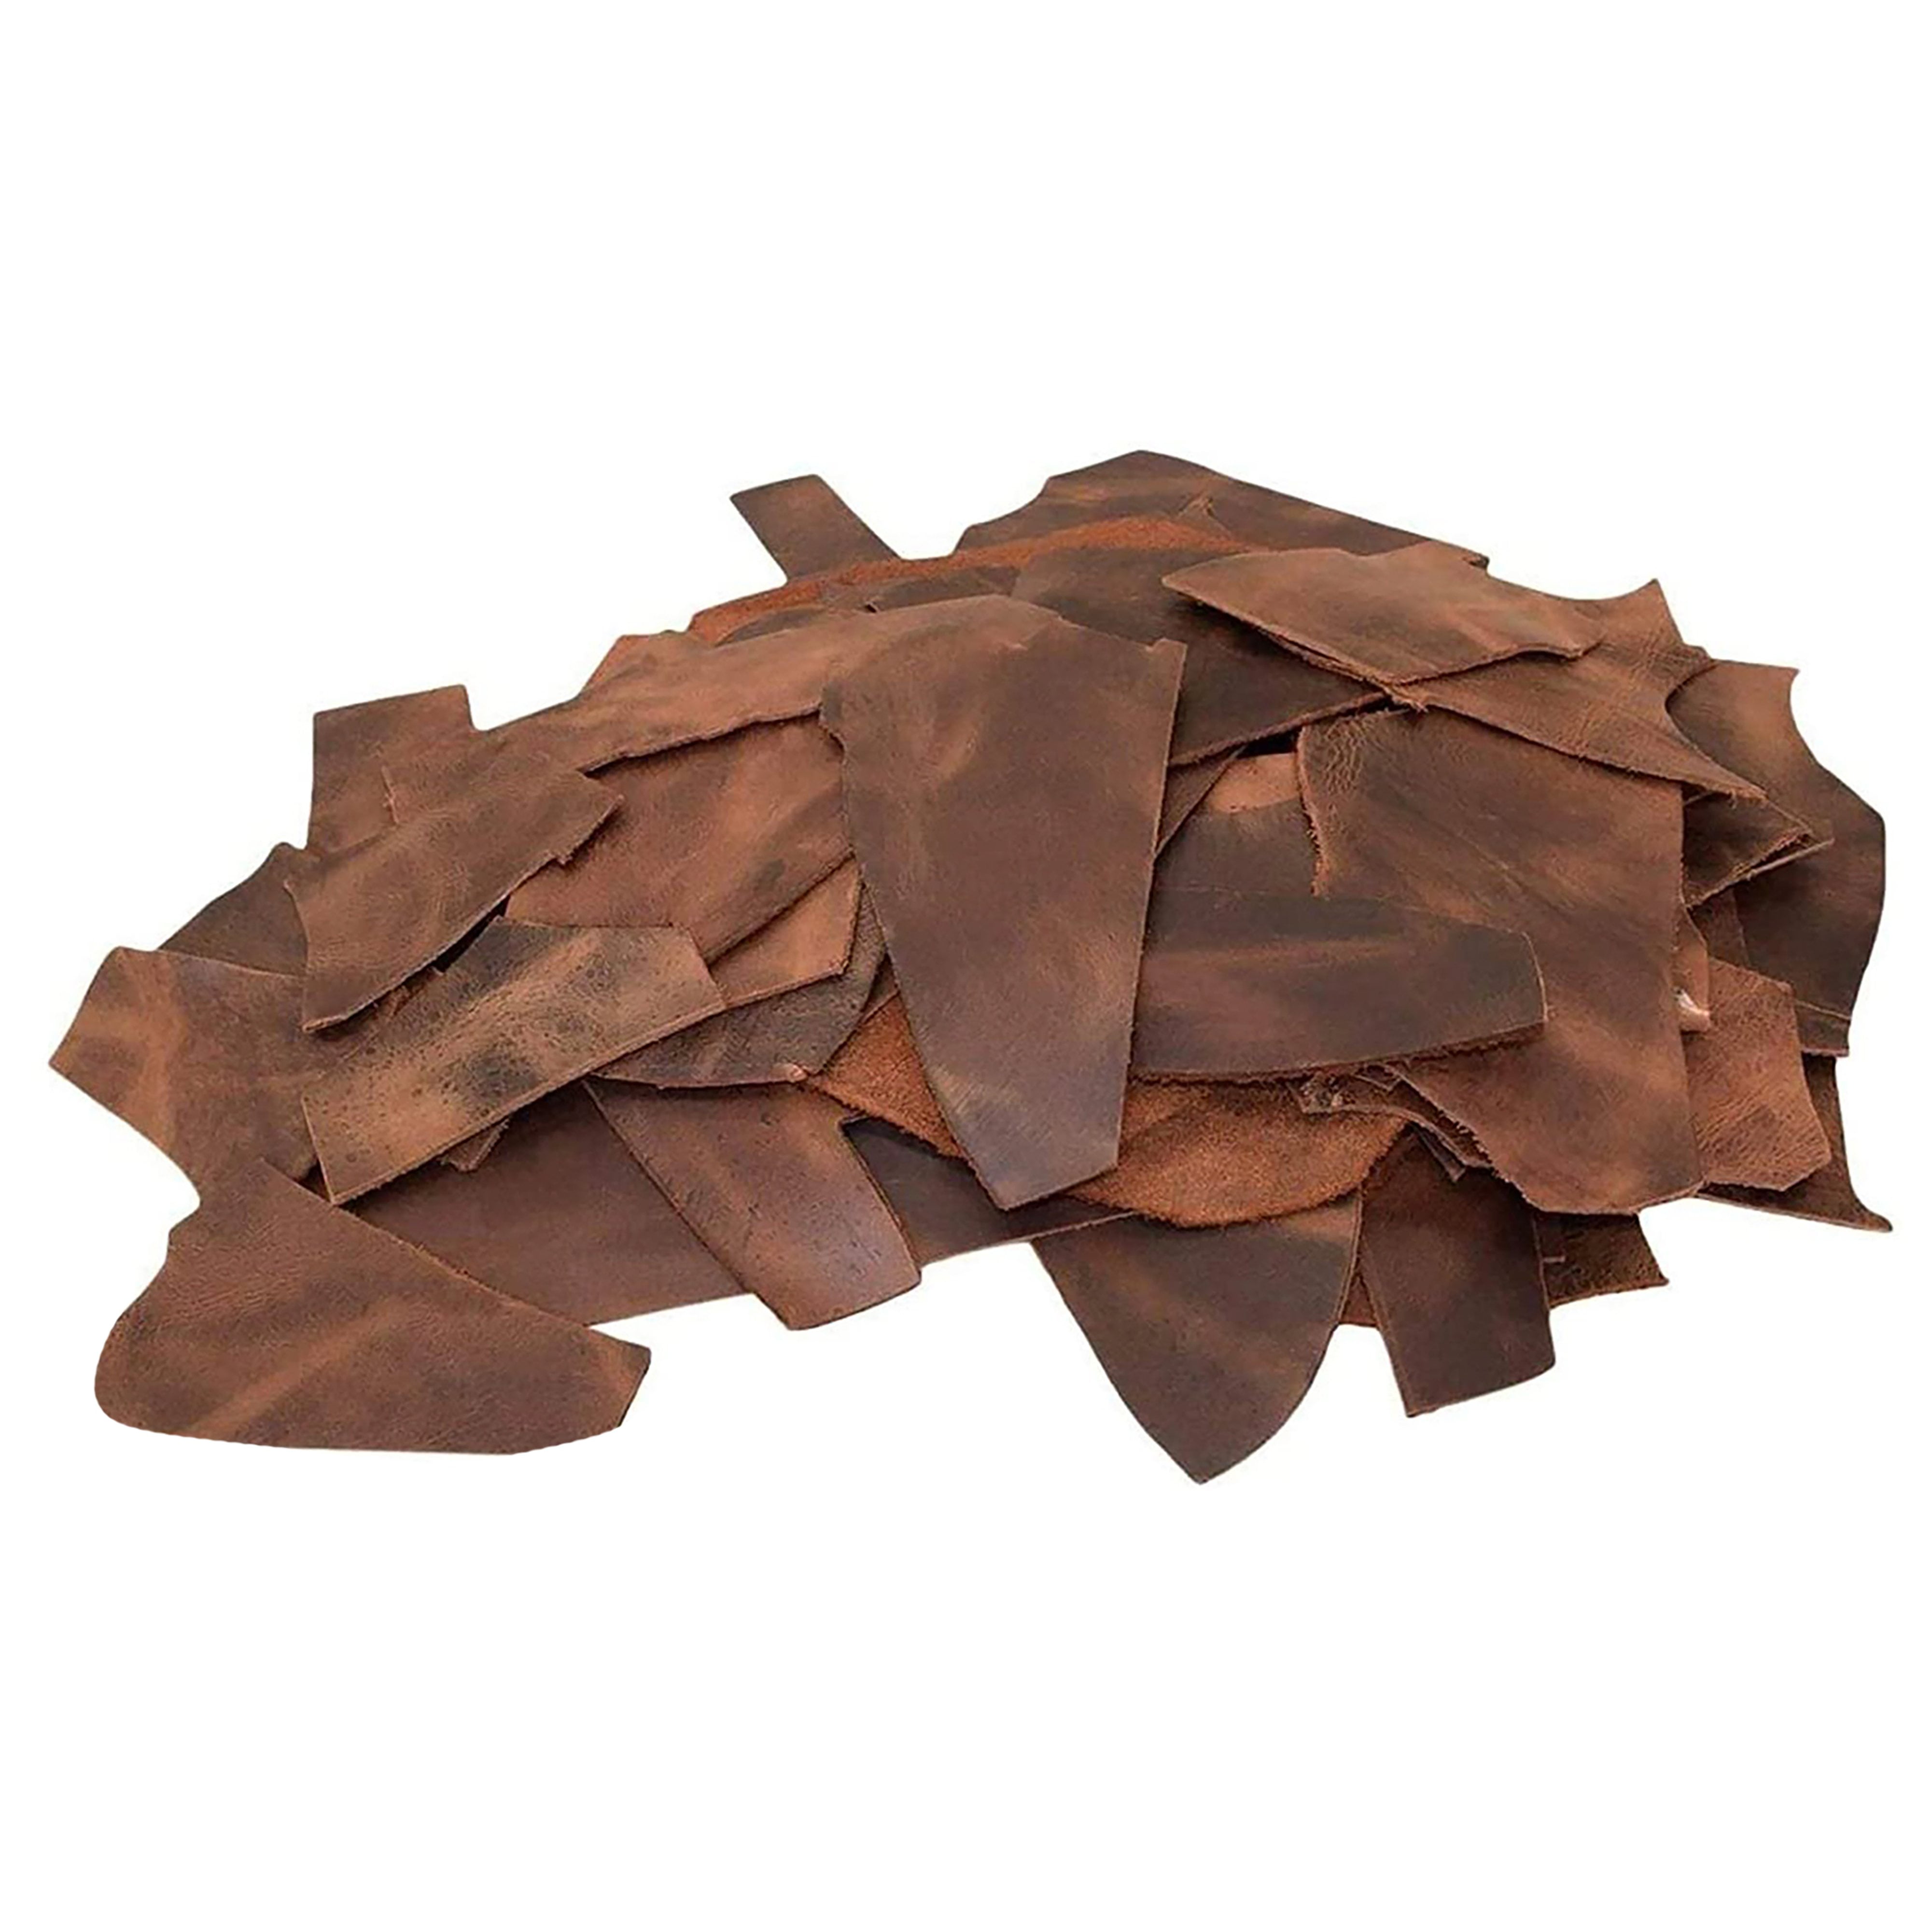 Where Can I Buy Leather Scraps? - Leather Facts